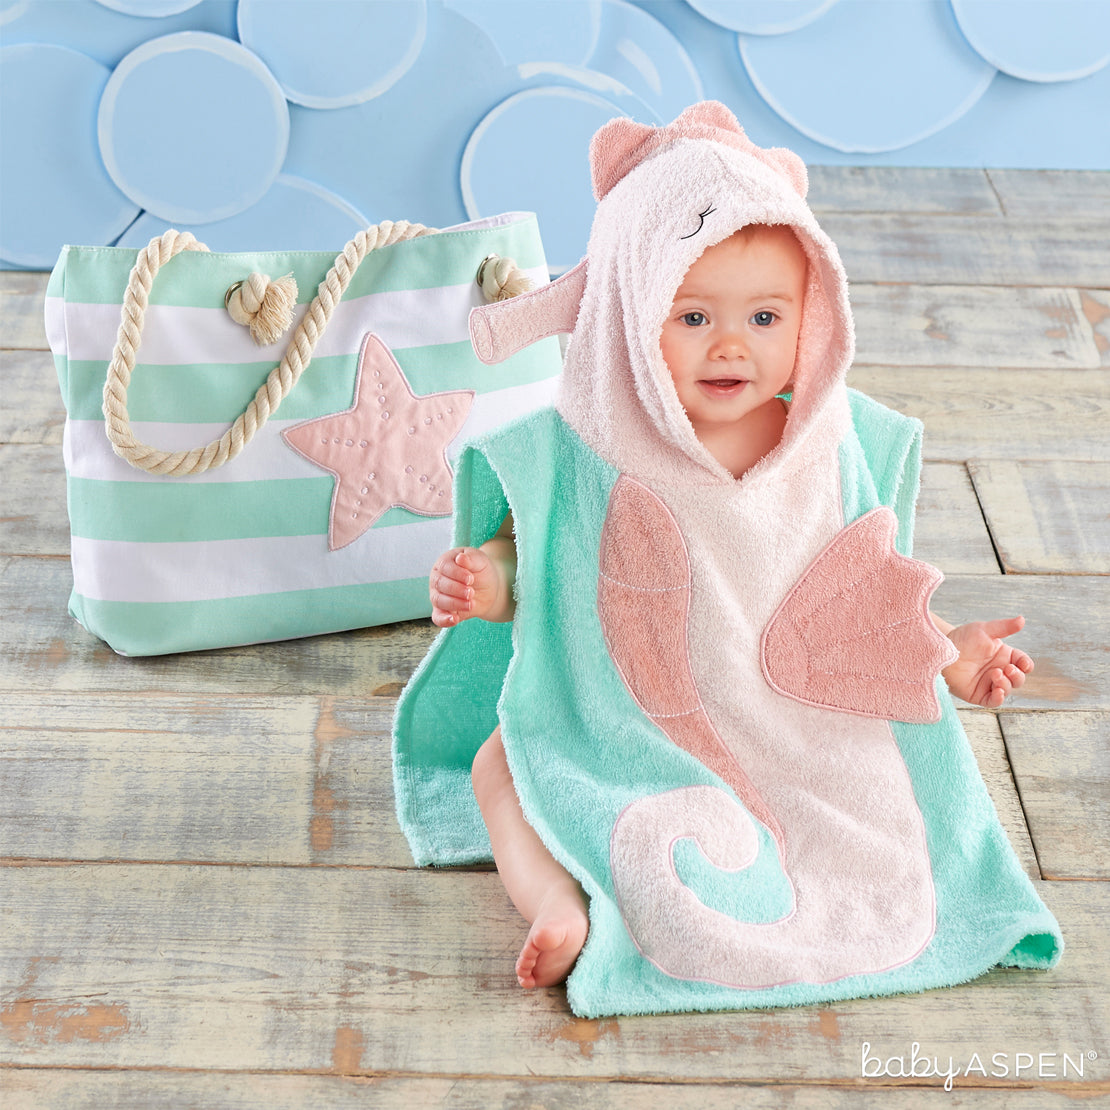 Seahorse Gift Set | Celebrate Summer With Beach Friendly Baby Gifts | Baby Aspen